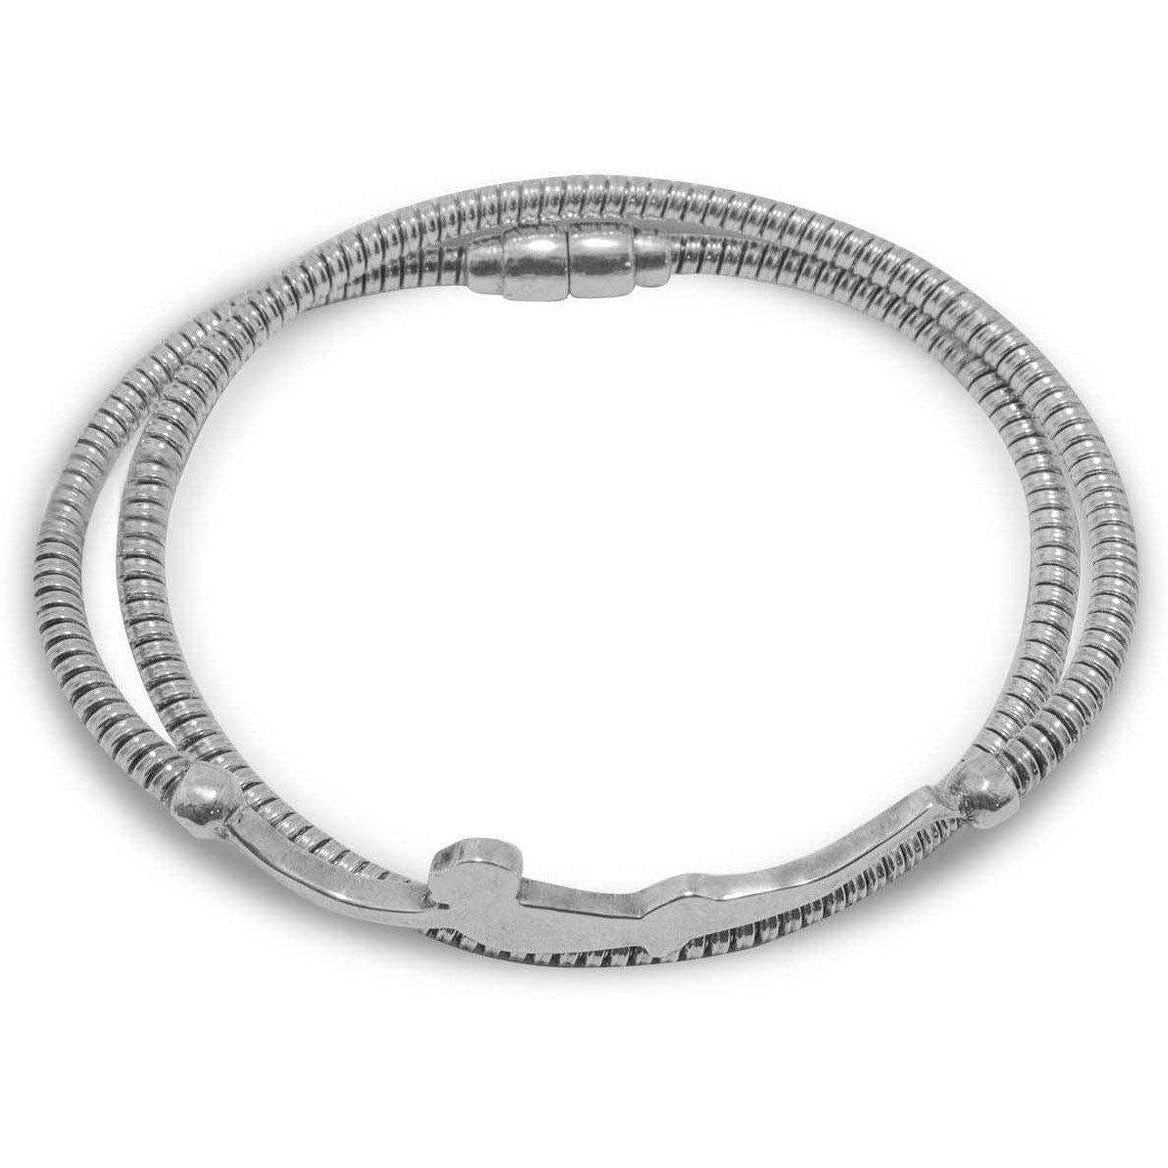 Buy LeCalla 925 Sterling Silver BIS Hallmarked Italian Diamond-Cut Rope  Chain Bracelet for Women and Girls 6.5 Inches at Amazon.in